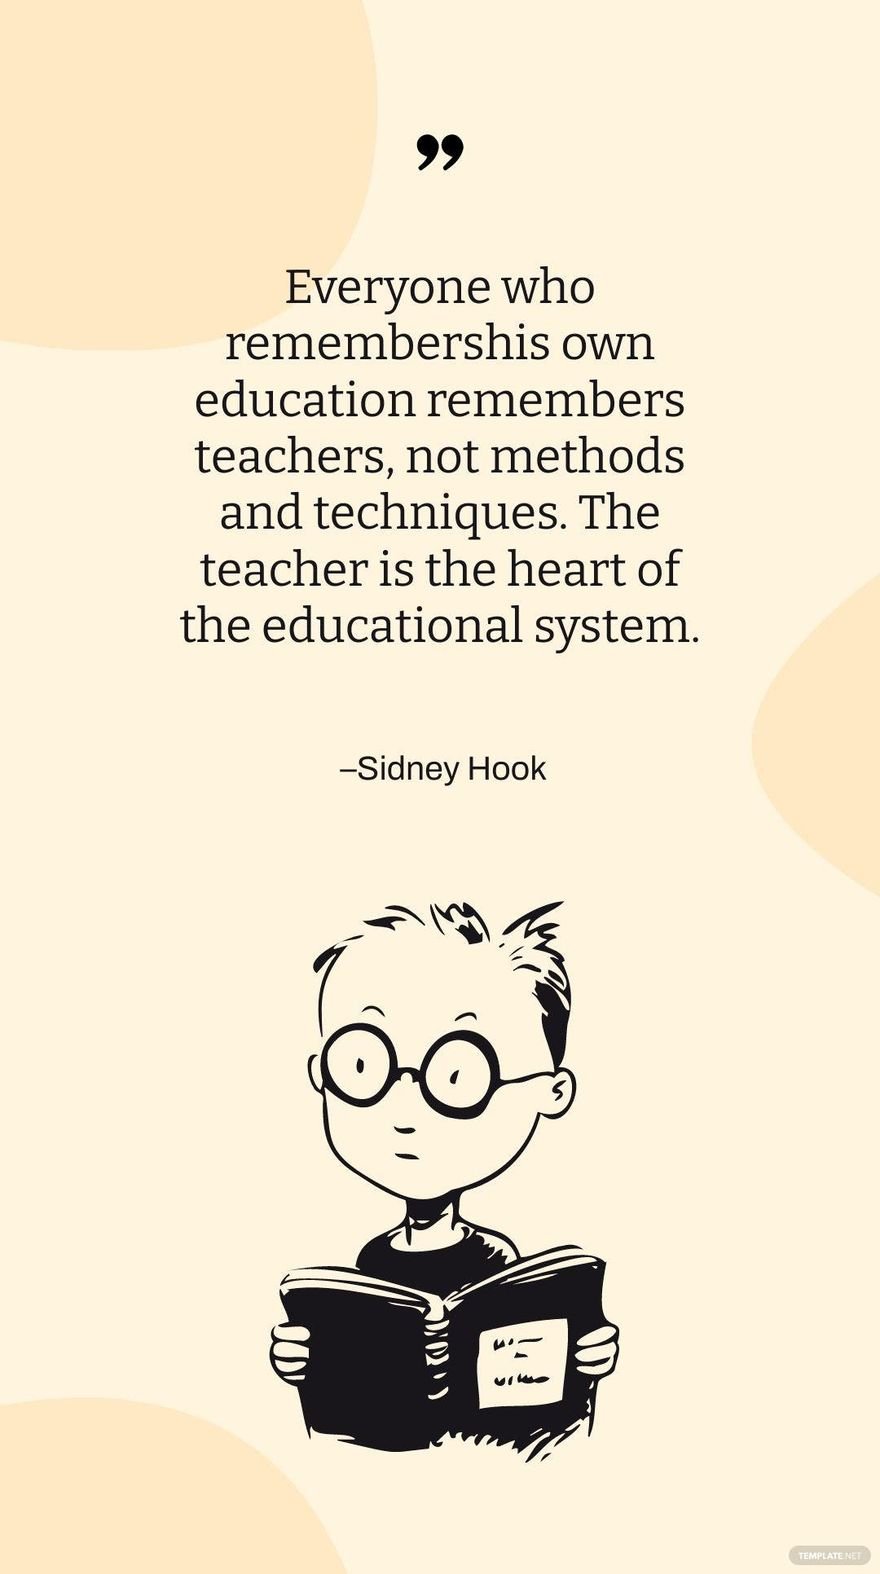 Free Sidney Hook - Everyone who remembers his own education remembers teachers, not methods and techniques. The teacher is the heart of the educational system. in JPG